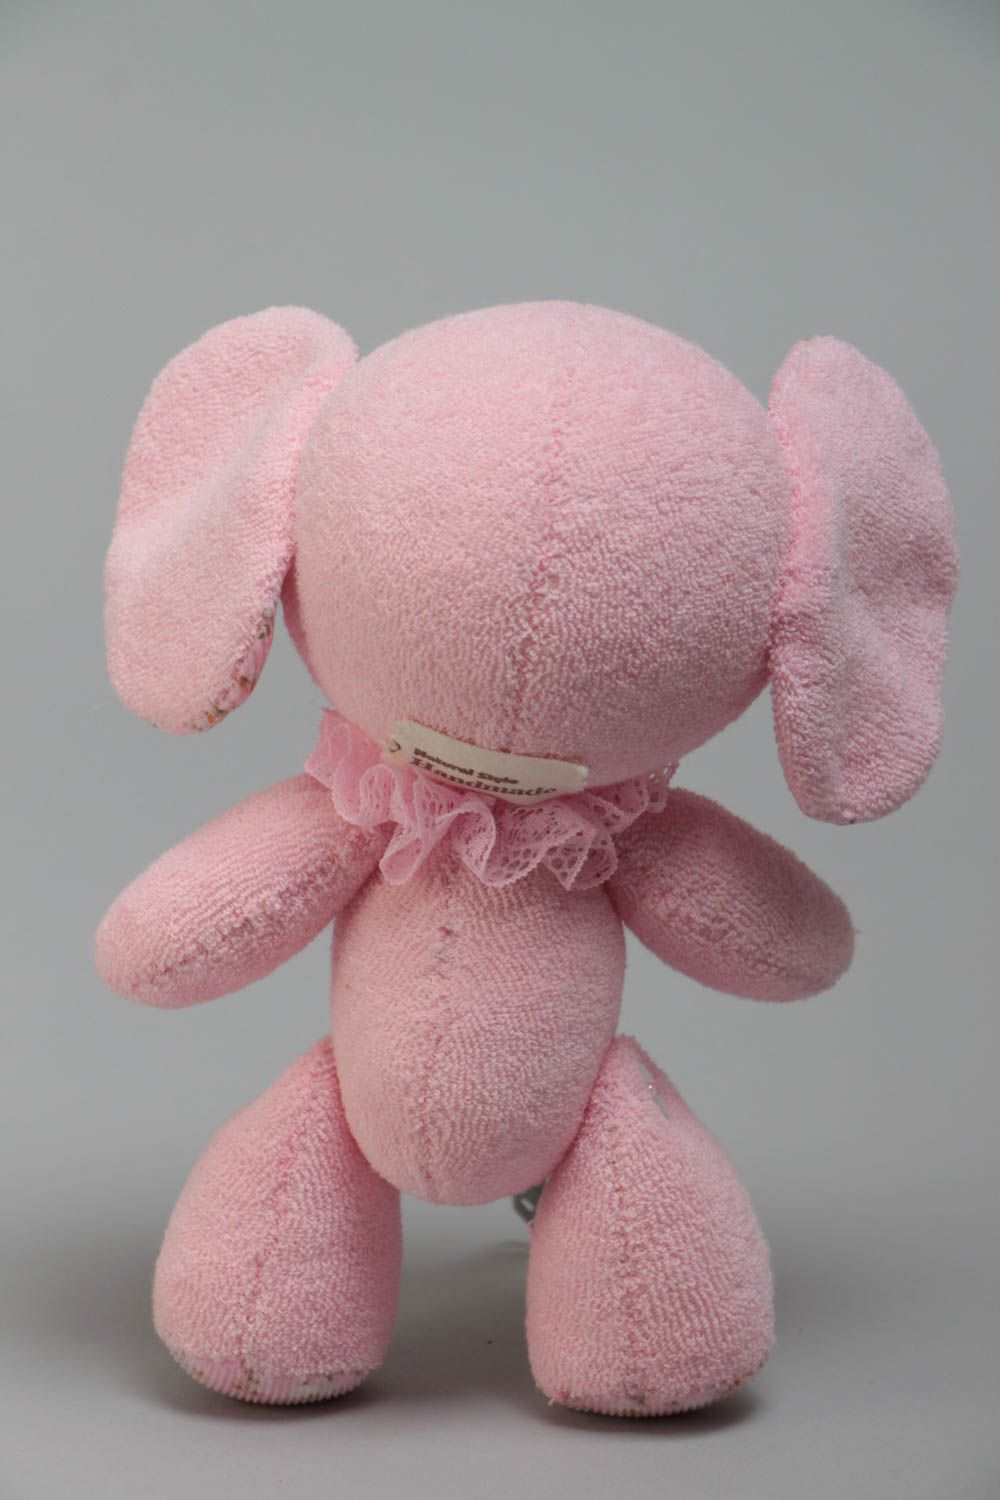 Handmade small mohair and jersey fabric soft toy pink elephant for children photo 4